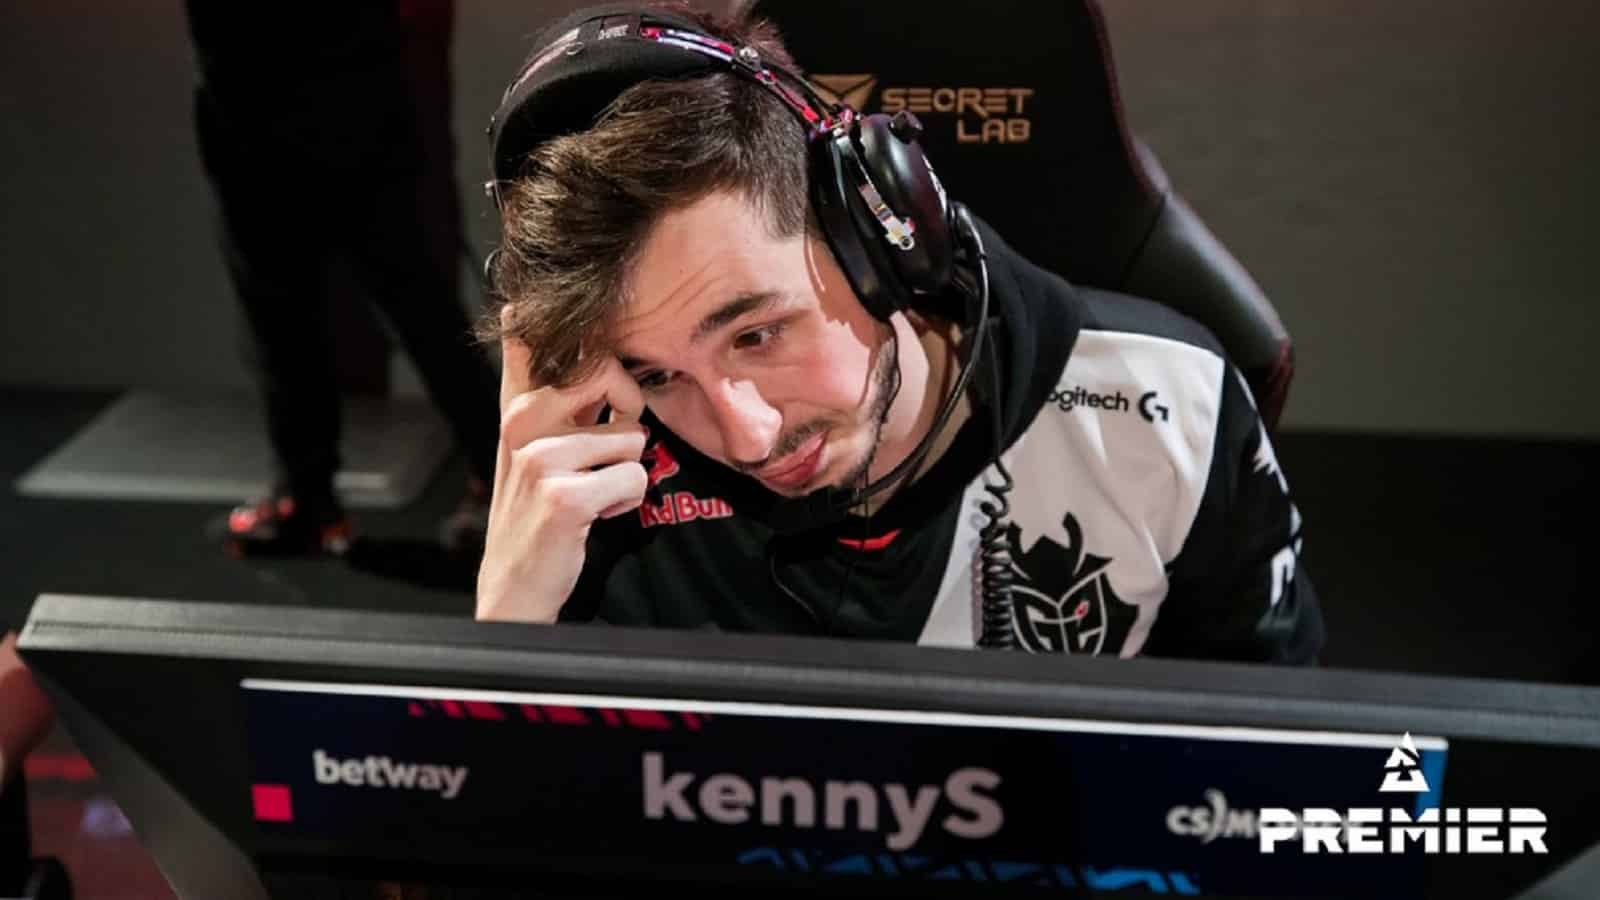 kennyS scratches head during match at BLAST event